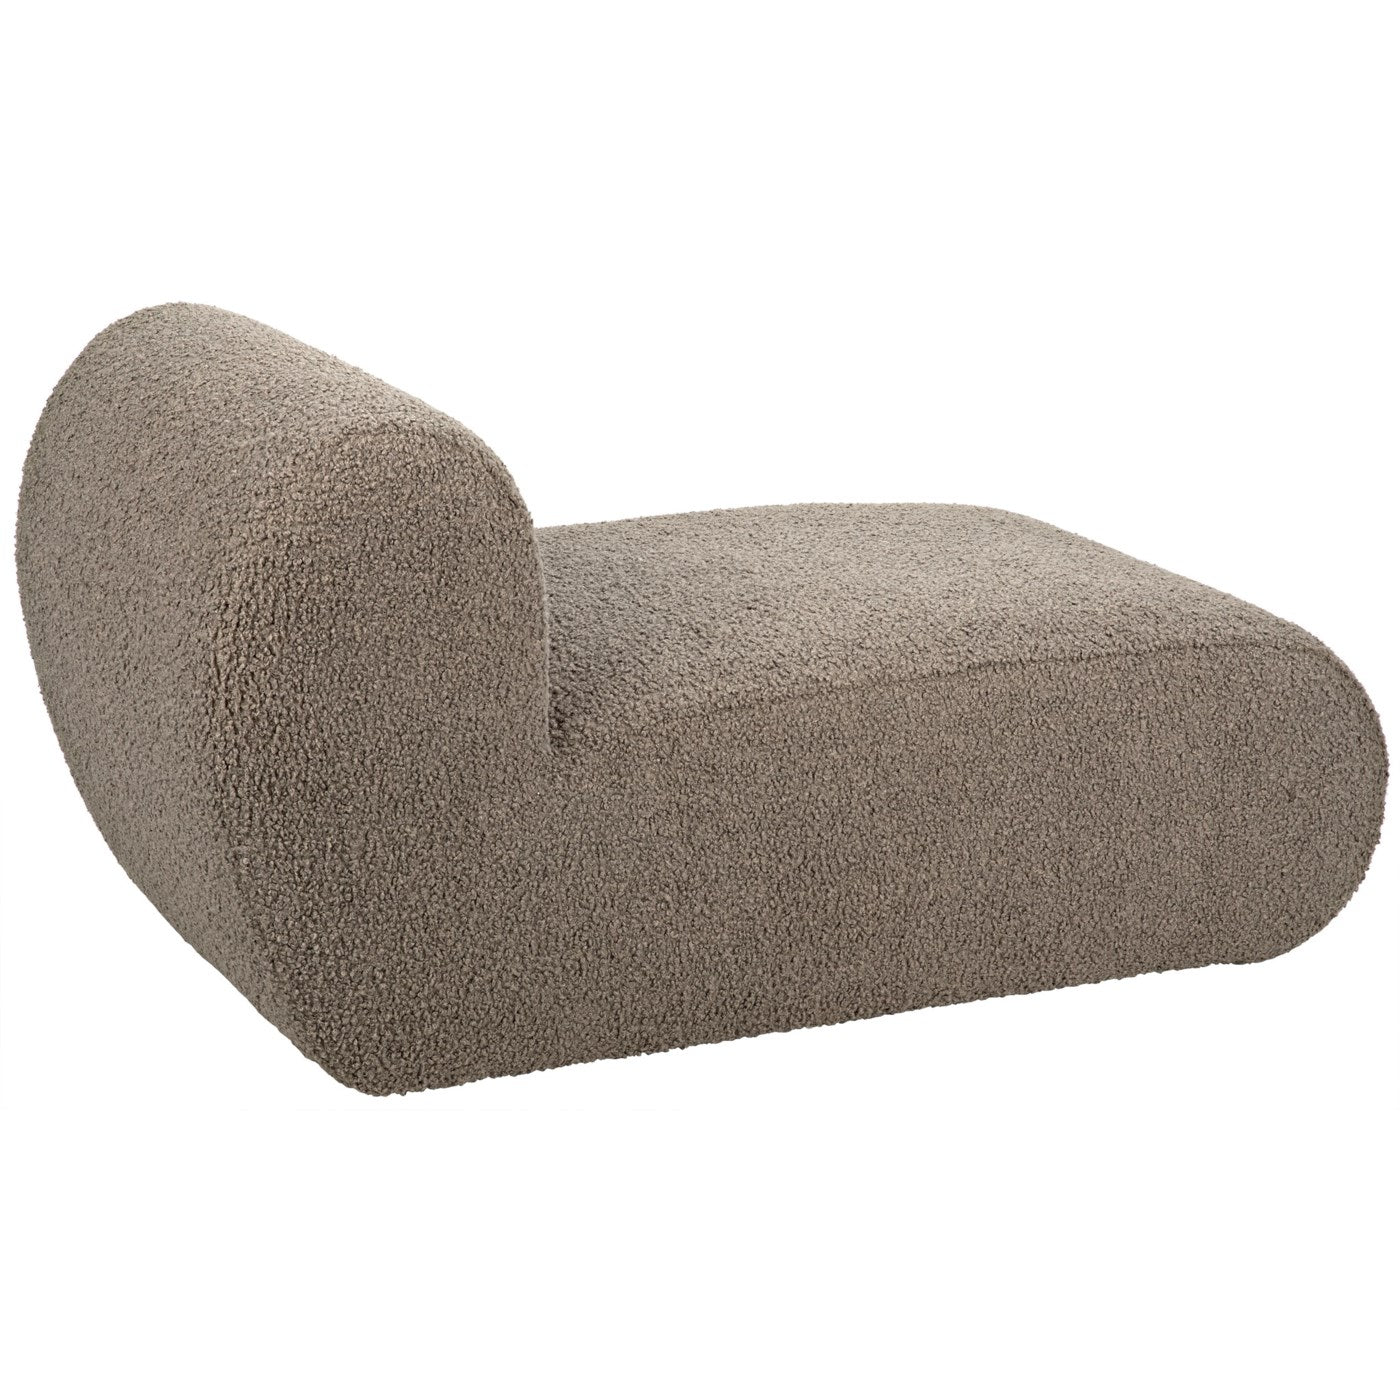 The Teddy P Chaise Lounge